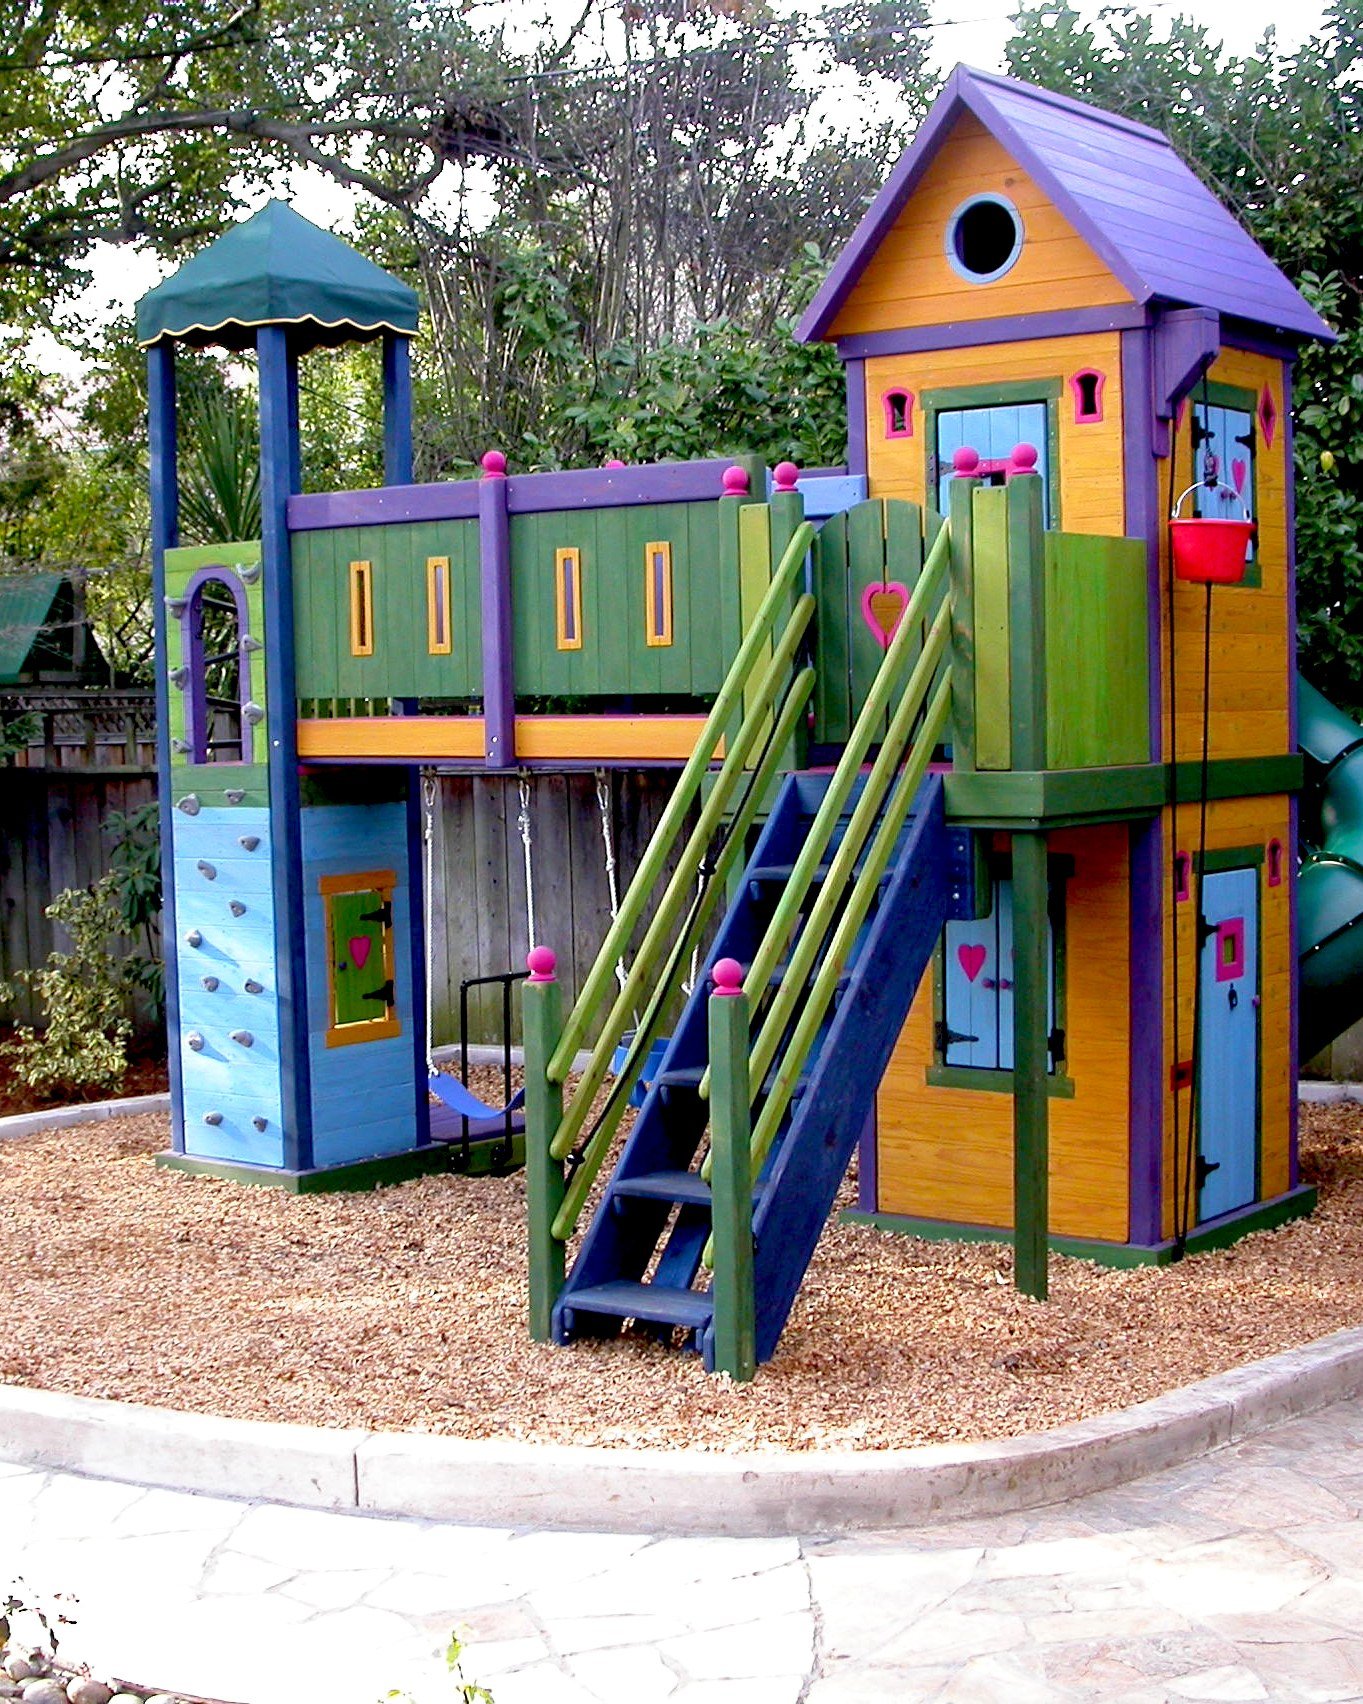 A dash of gingerbread, a pinch of wizard, and a dusting of castle went into this two-story fort playhouse. Compact, but packed with play accessories such as a rock wall, crazy bar climb, earthquake platform, turbo slide and bucket pulley, you get a l